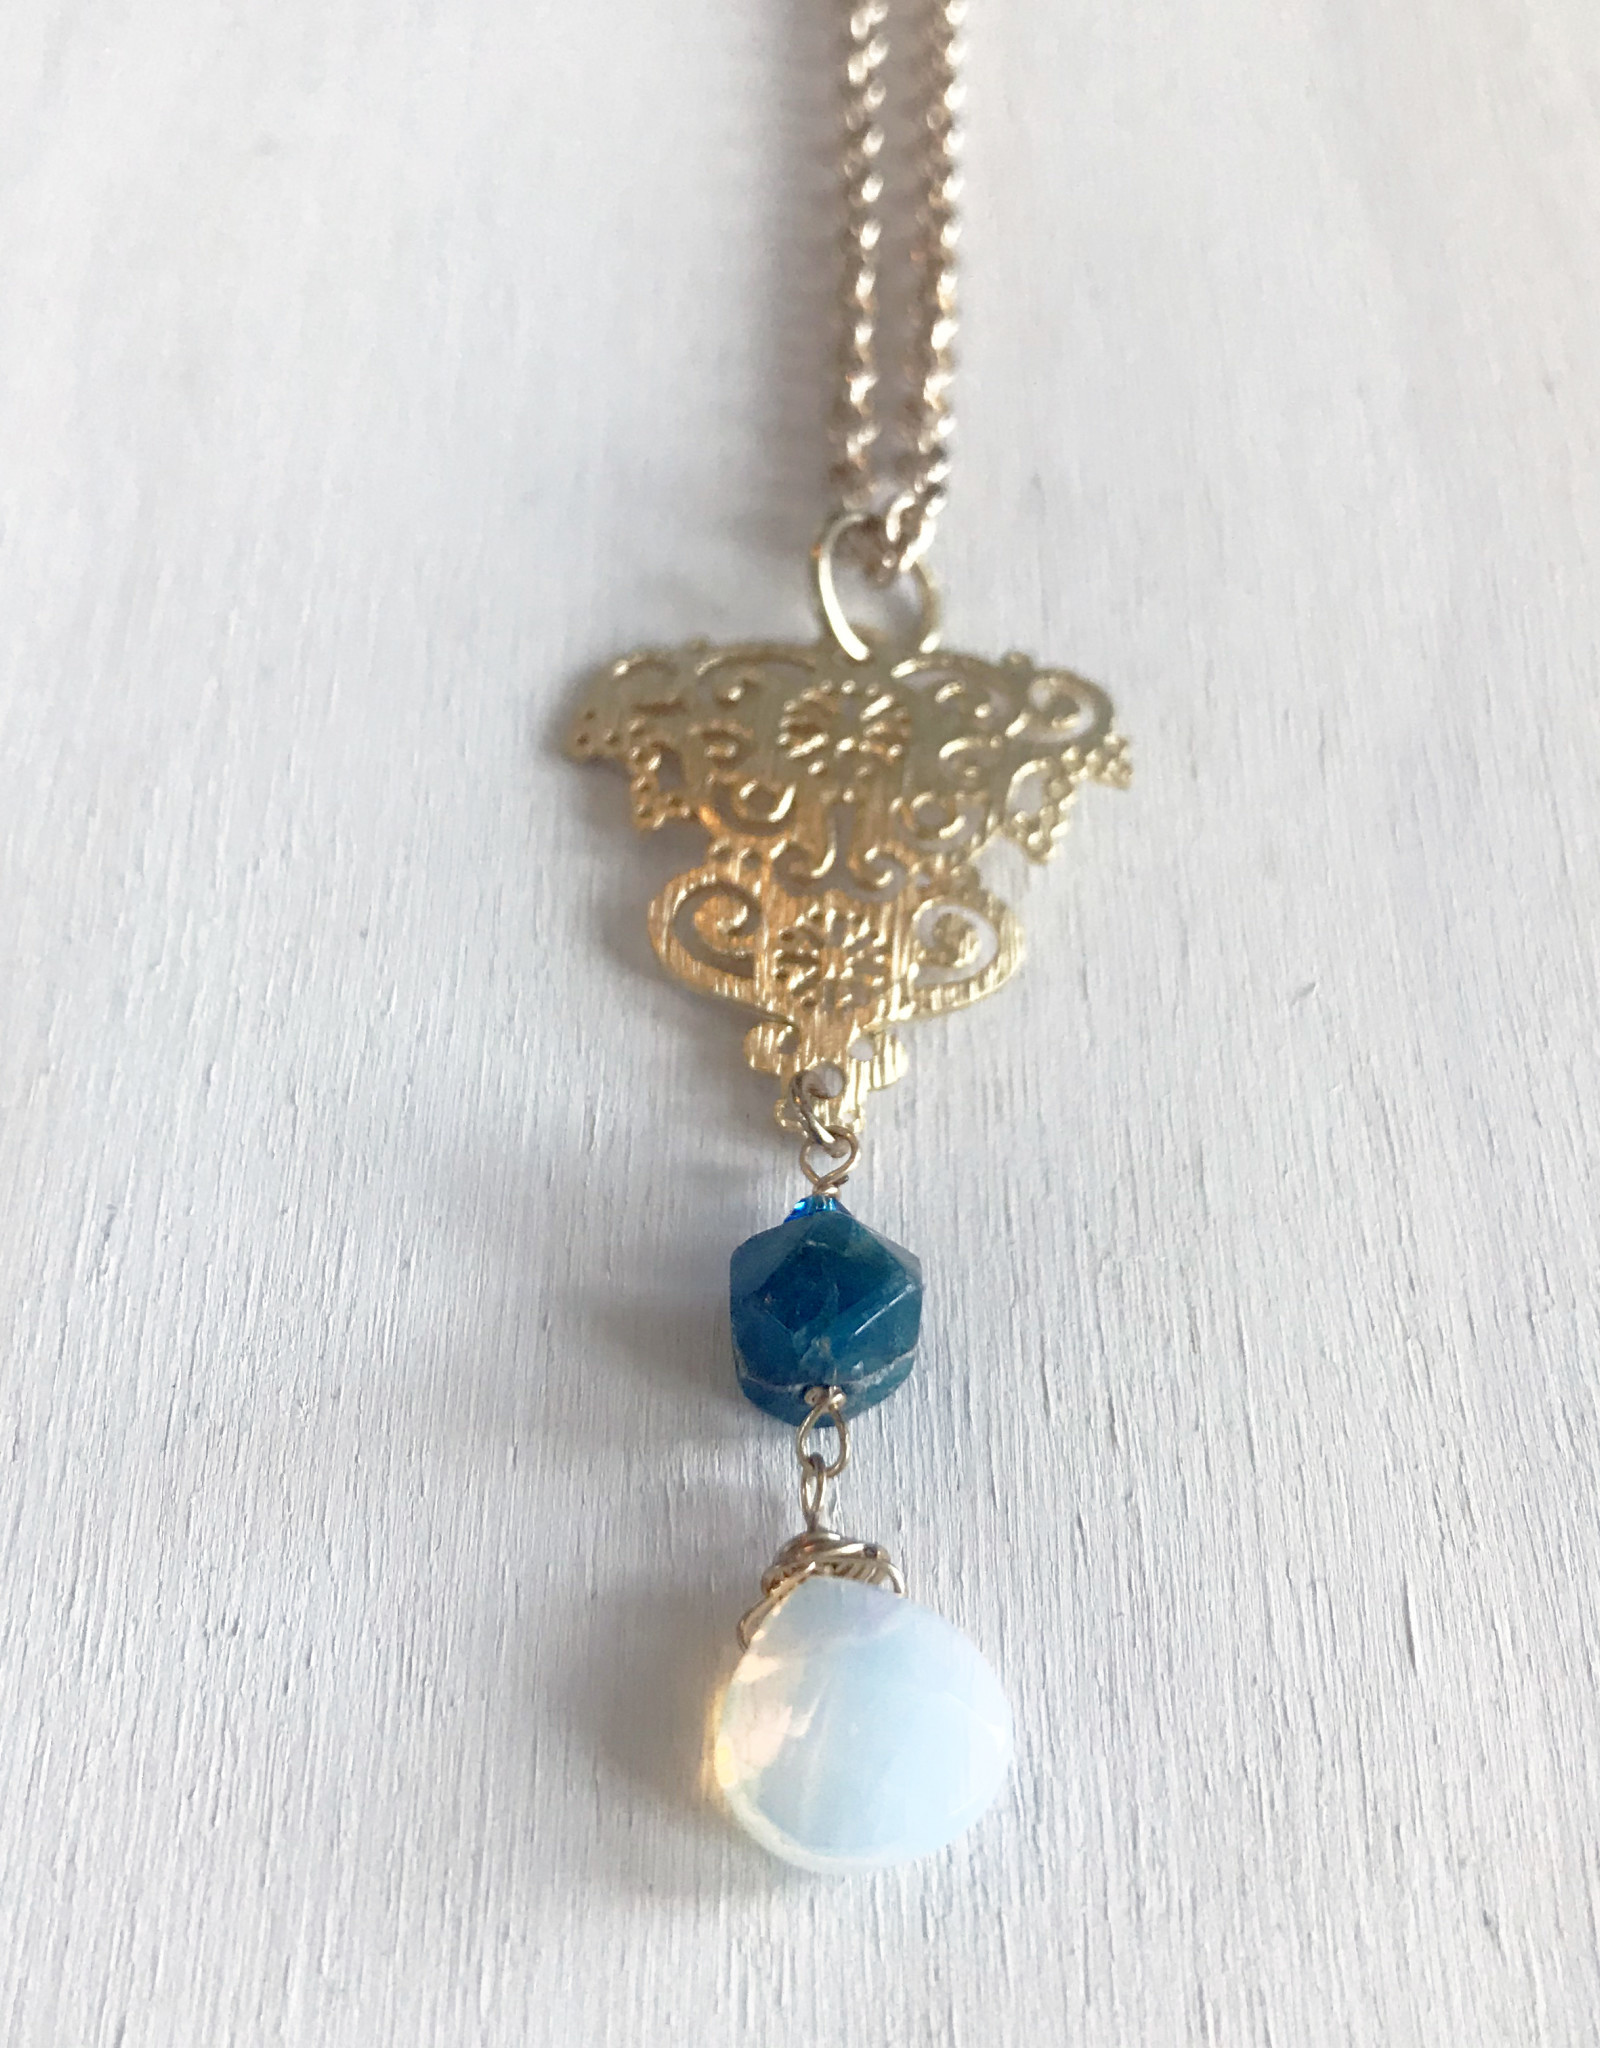 Devil May Wear Storytime Necklace. Rough Apatite stone with Moonstone drop. Swarovski Crystal. Gold plated chain. 24"